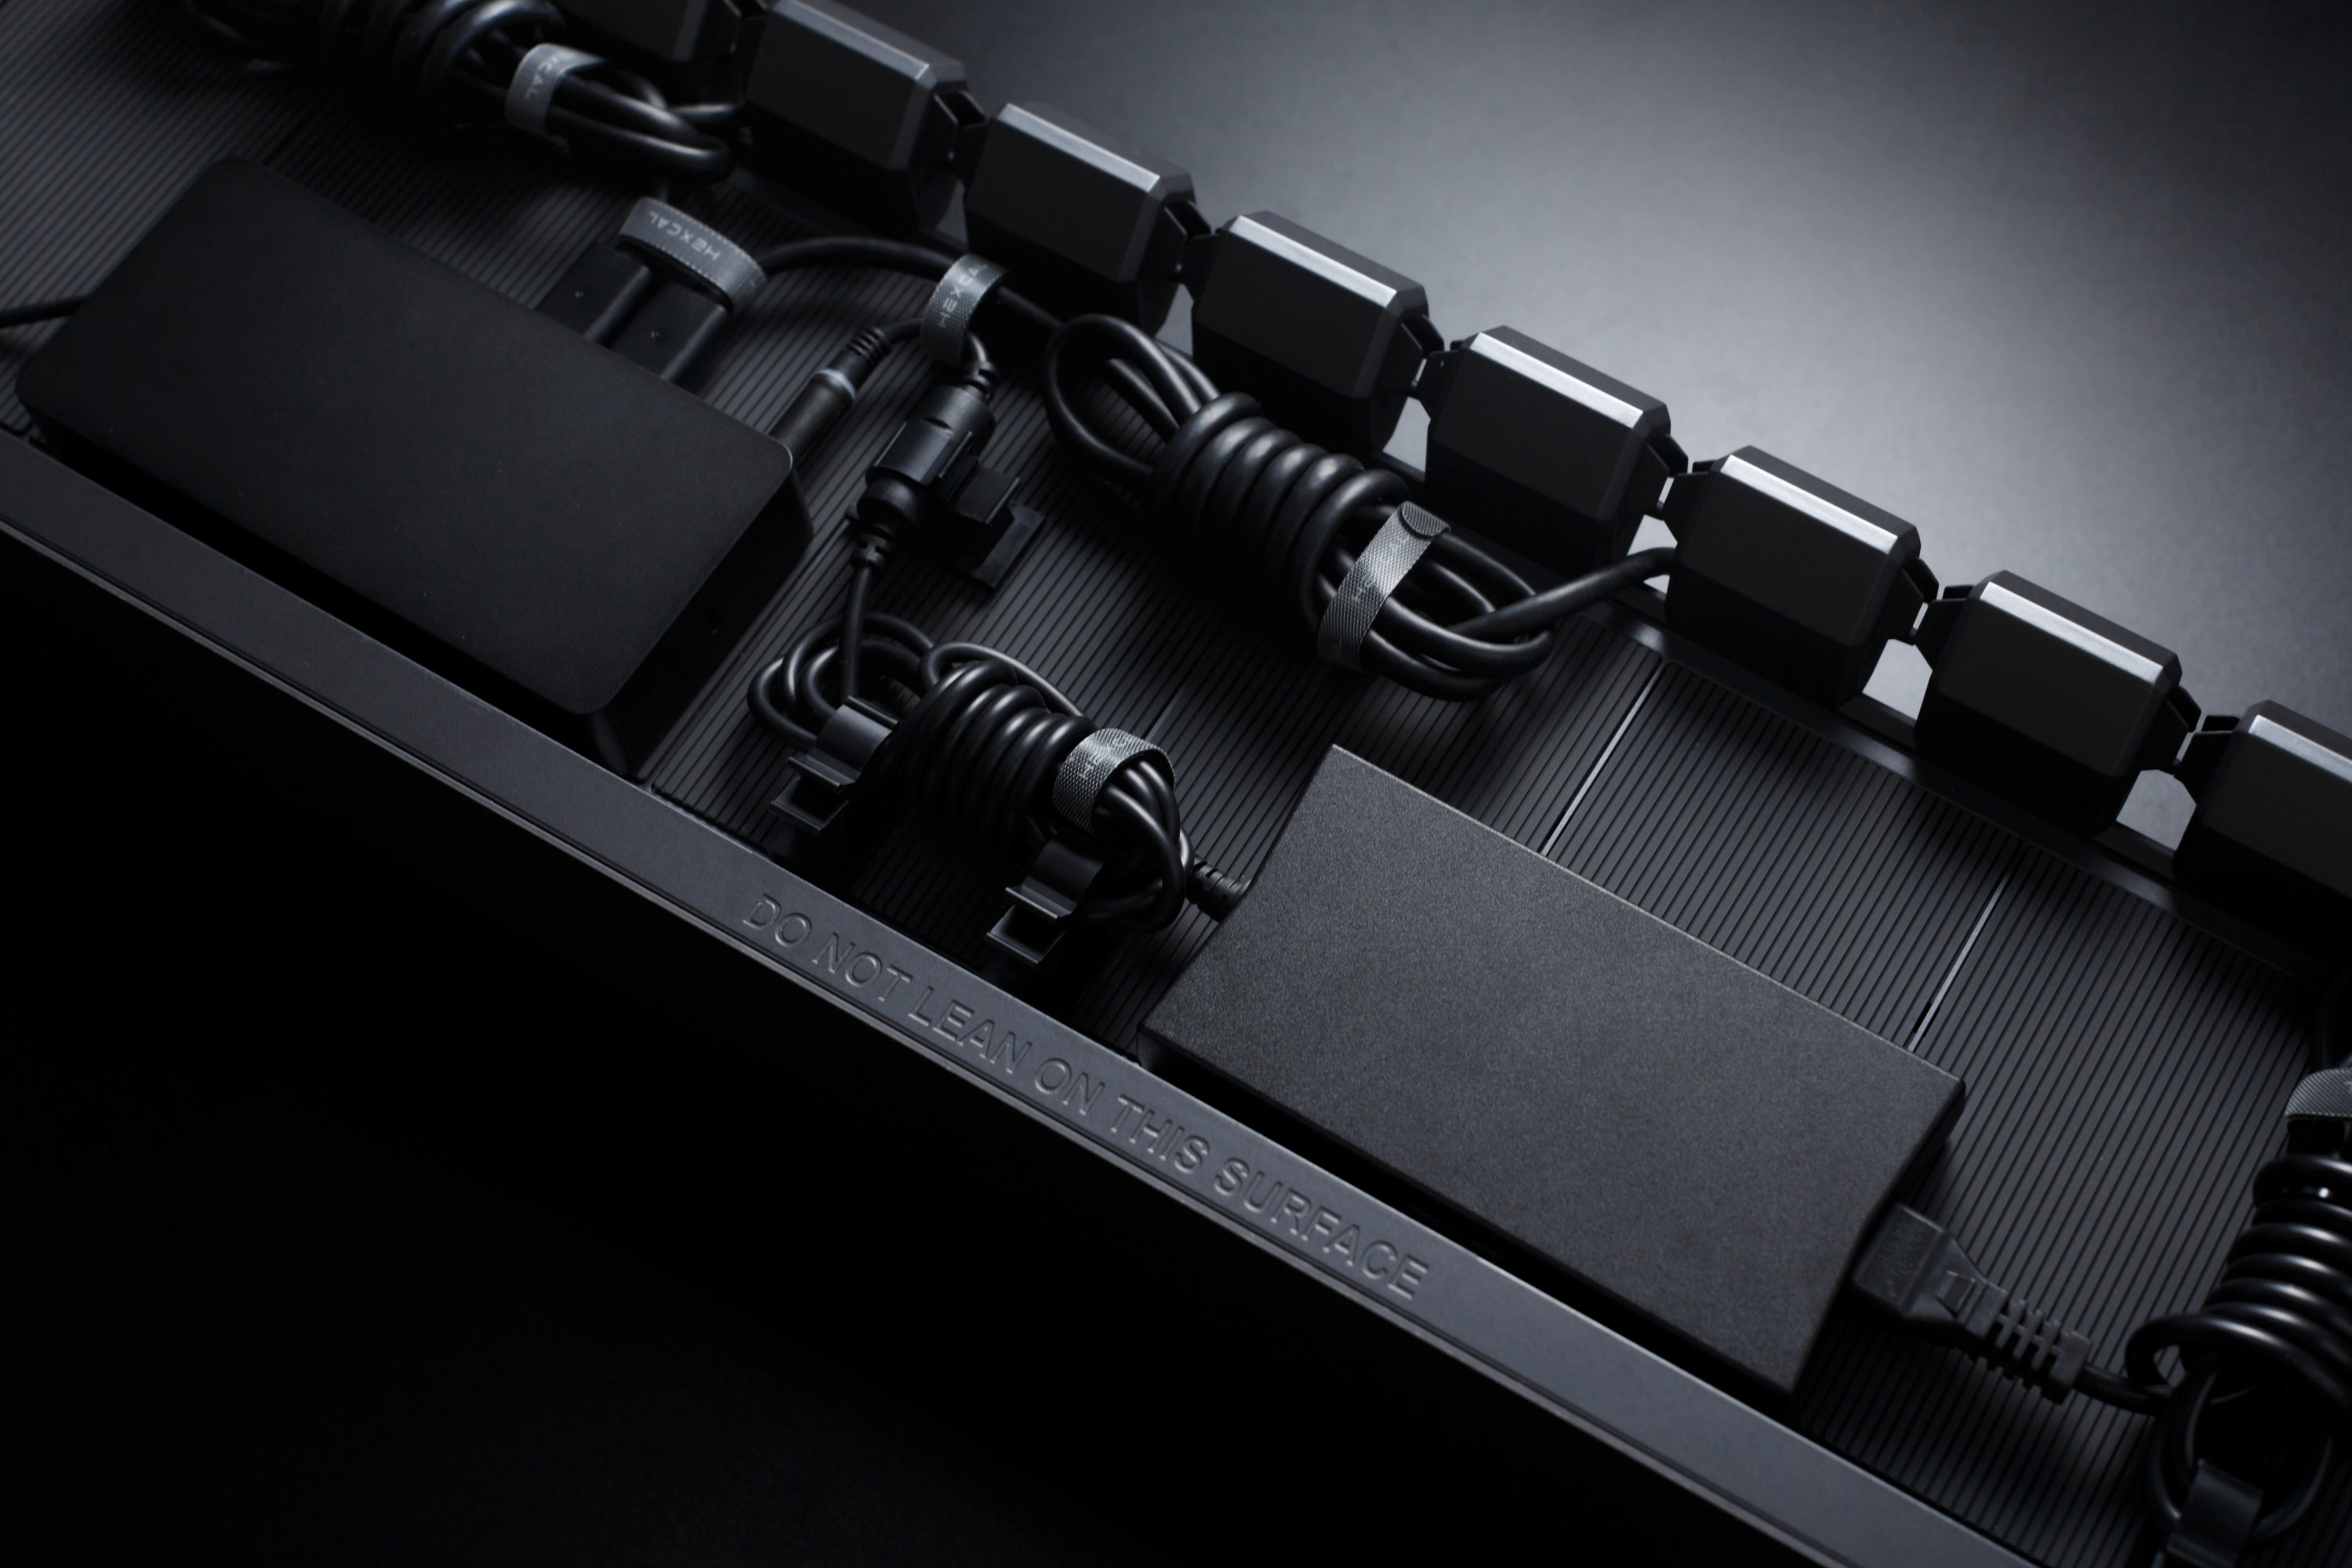 Hexcal Studio's innovative cable management solution to keep your desk organized and clean.